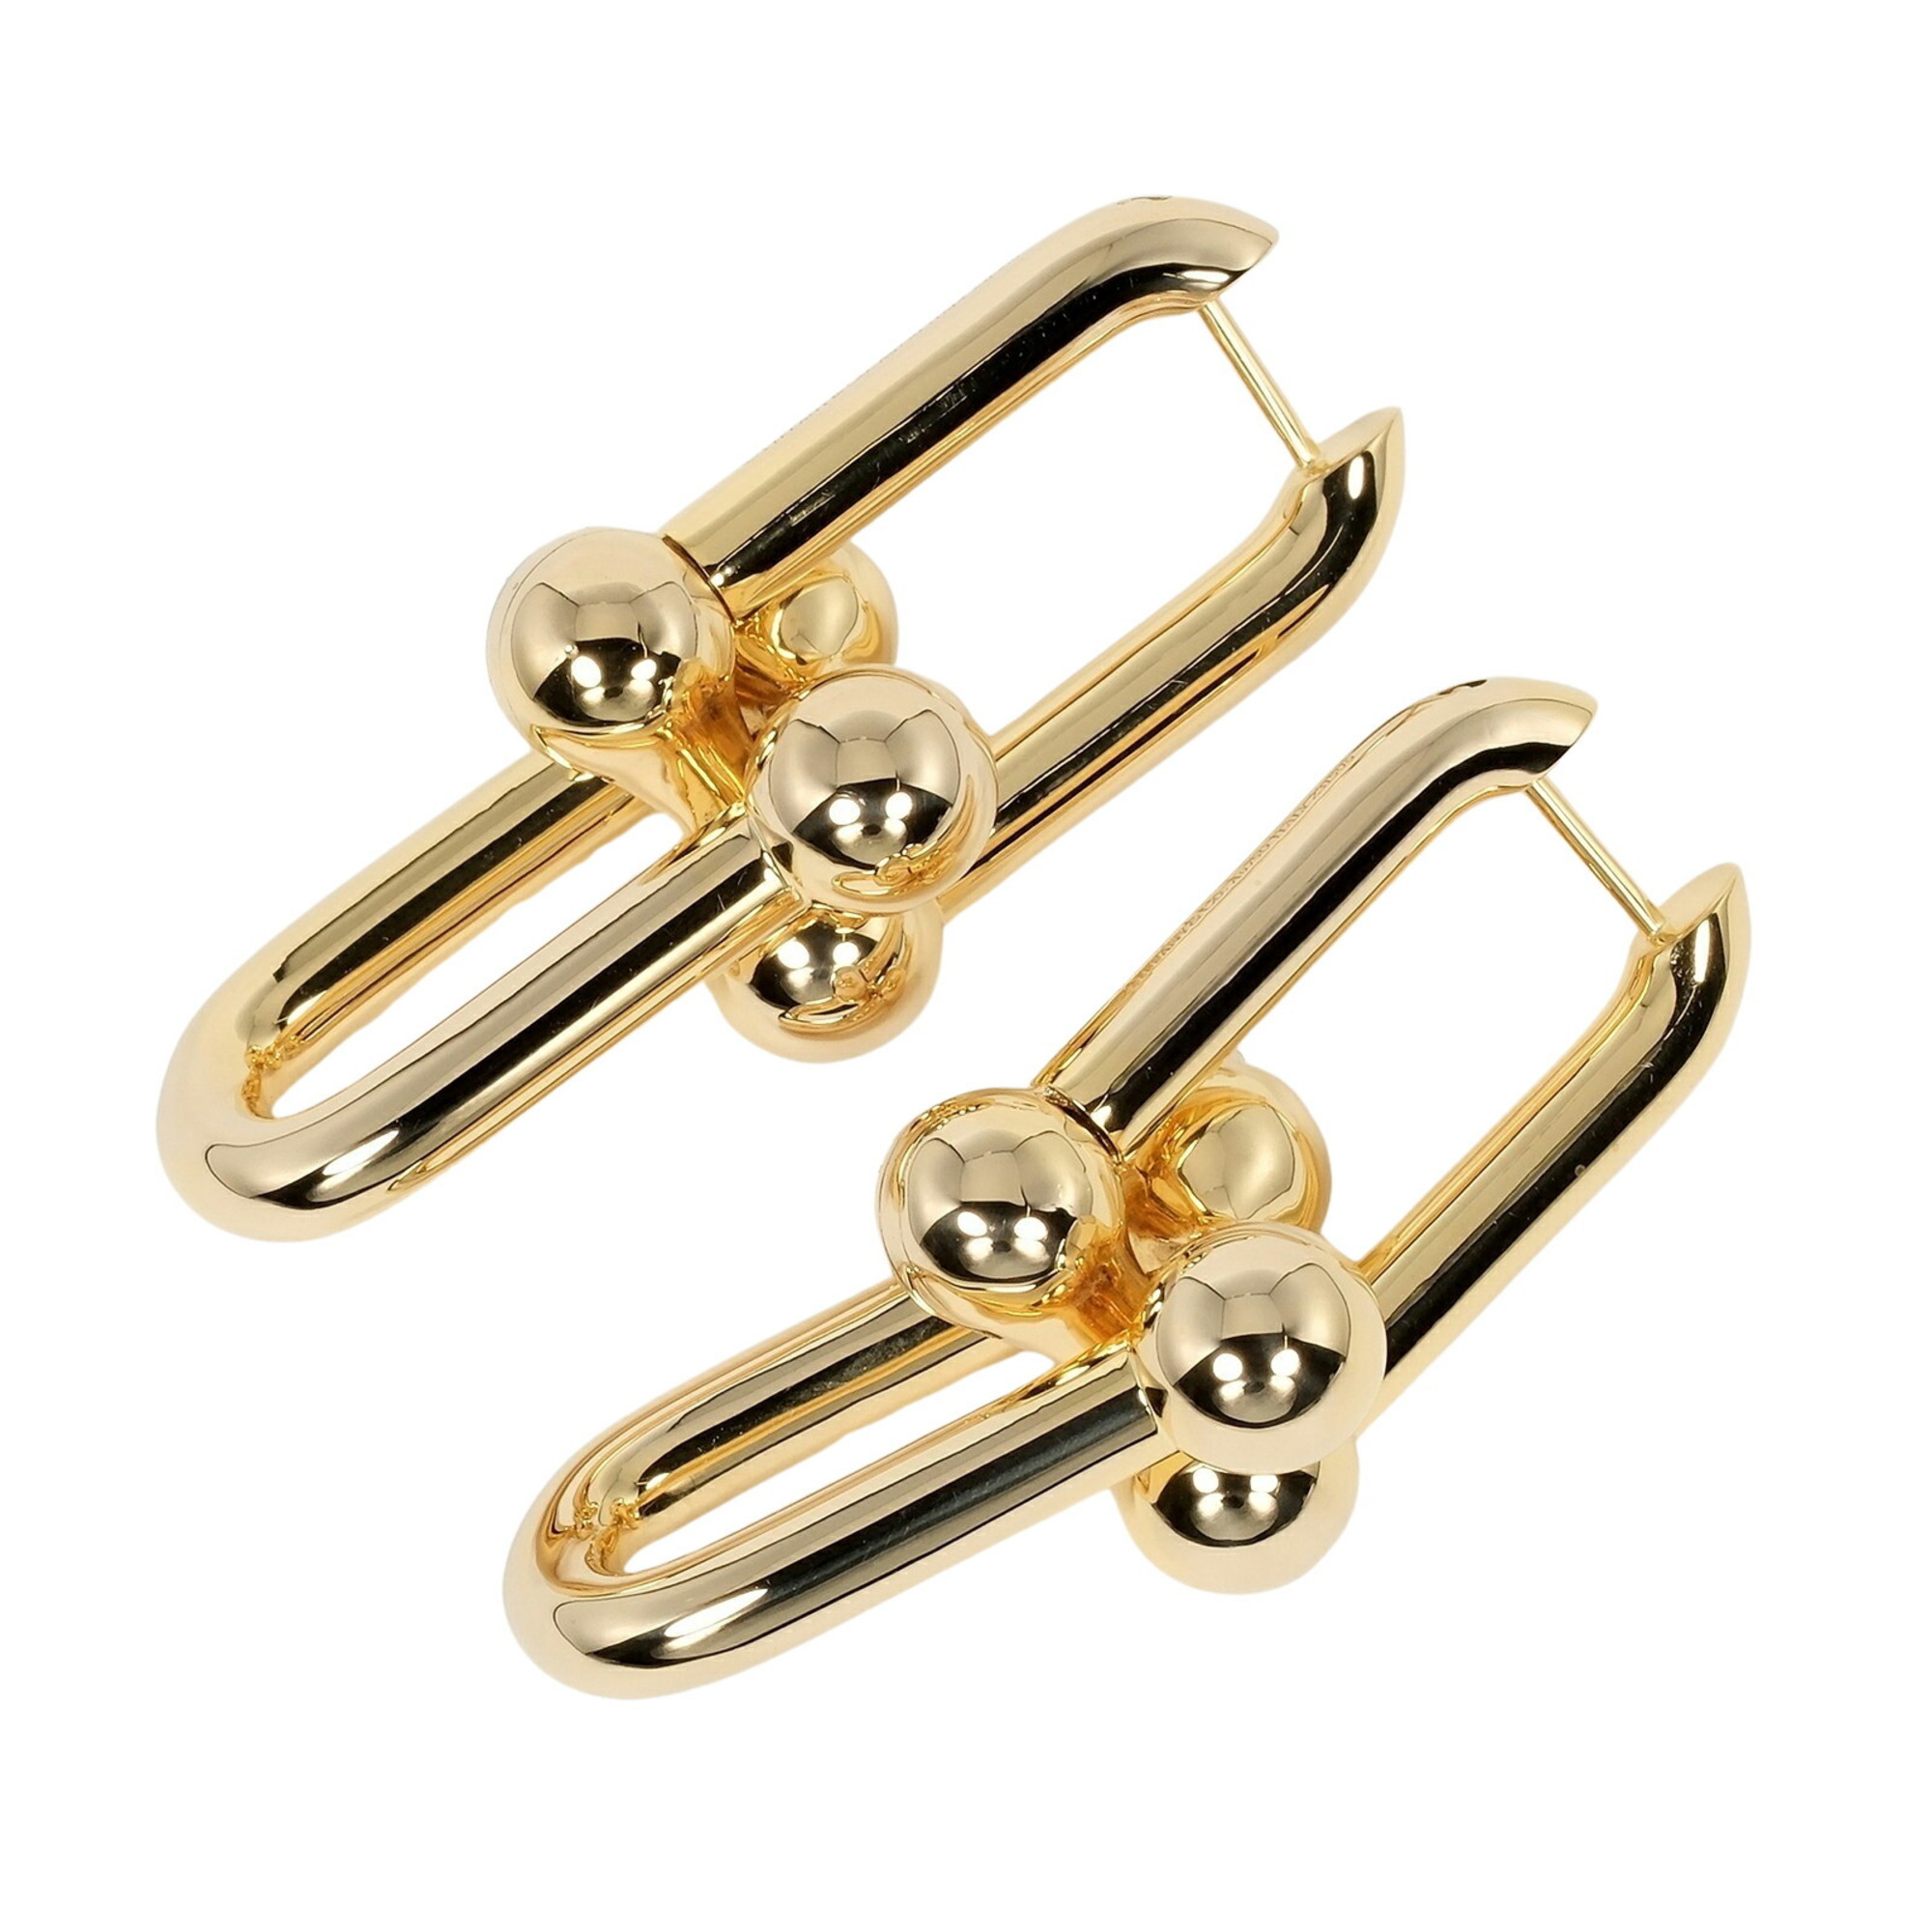 Tiffany TIFFANY&Co. Hardware Extra Large Earrings K18 YG Yellow Gold Approx. 17.3g T121724523